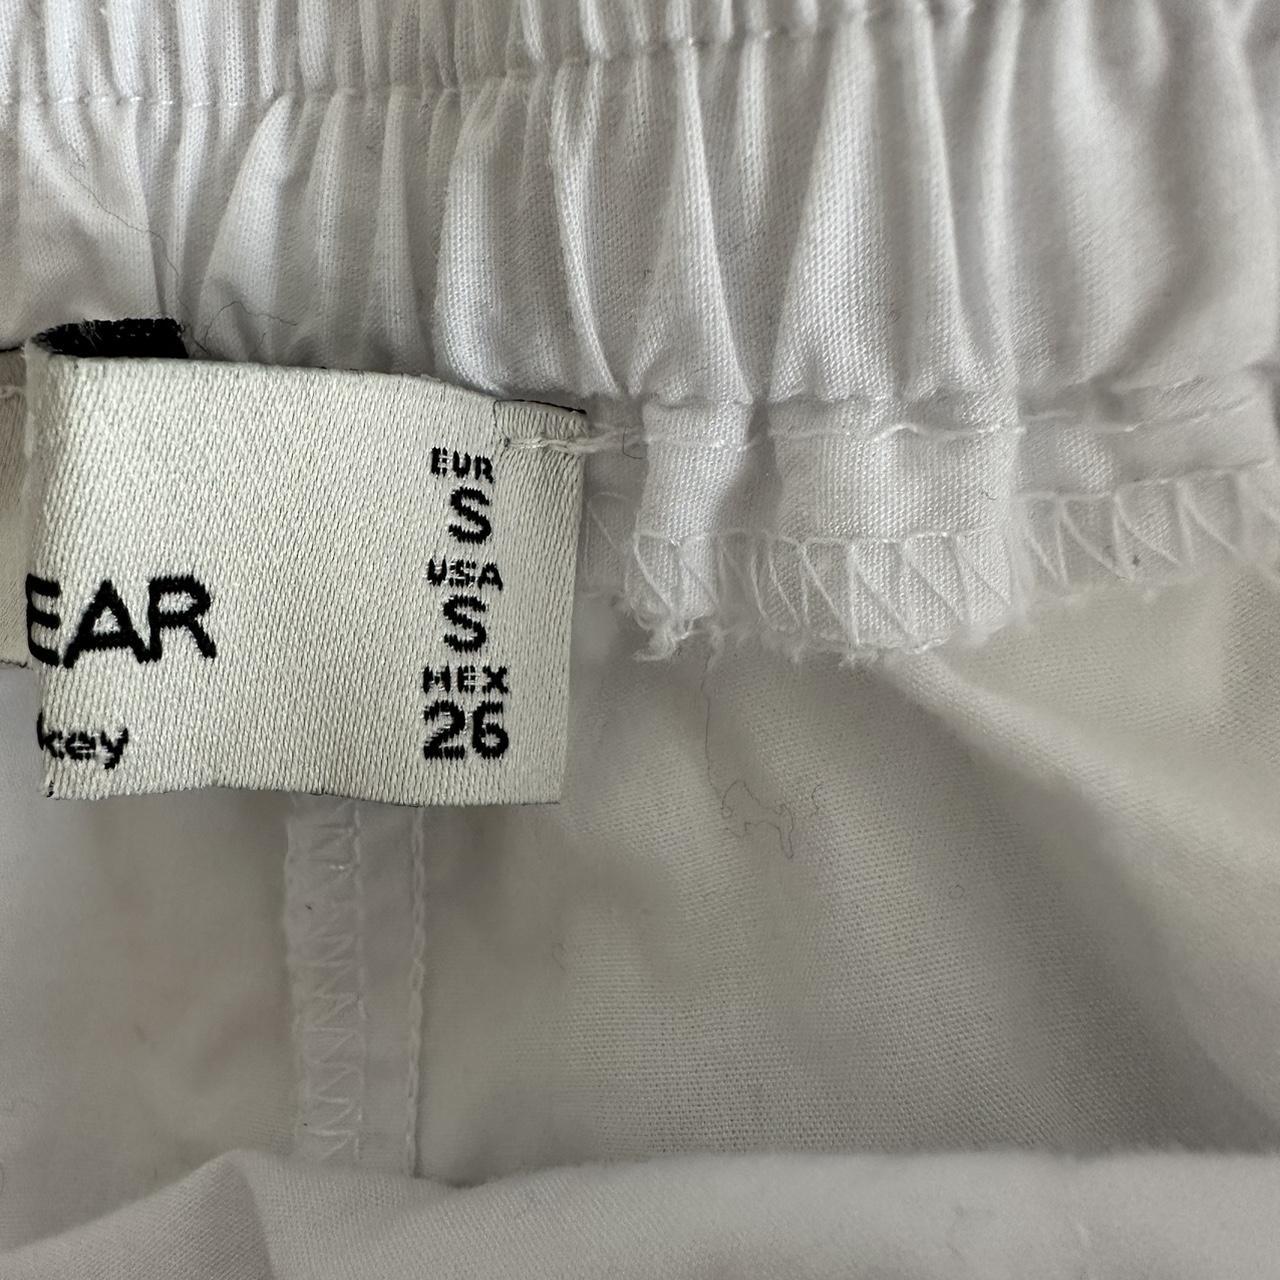 WHITE PULL AND BEAR SHORTS - size small (6/8) -... - Depop